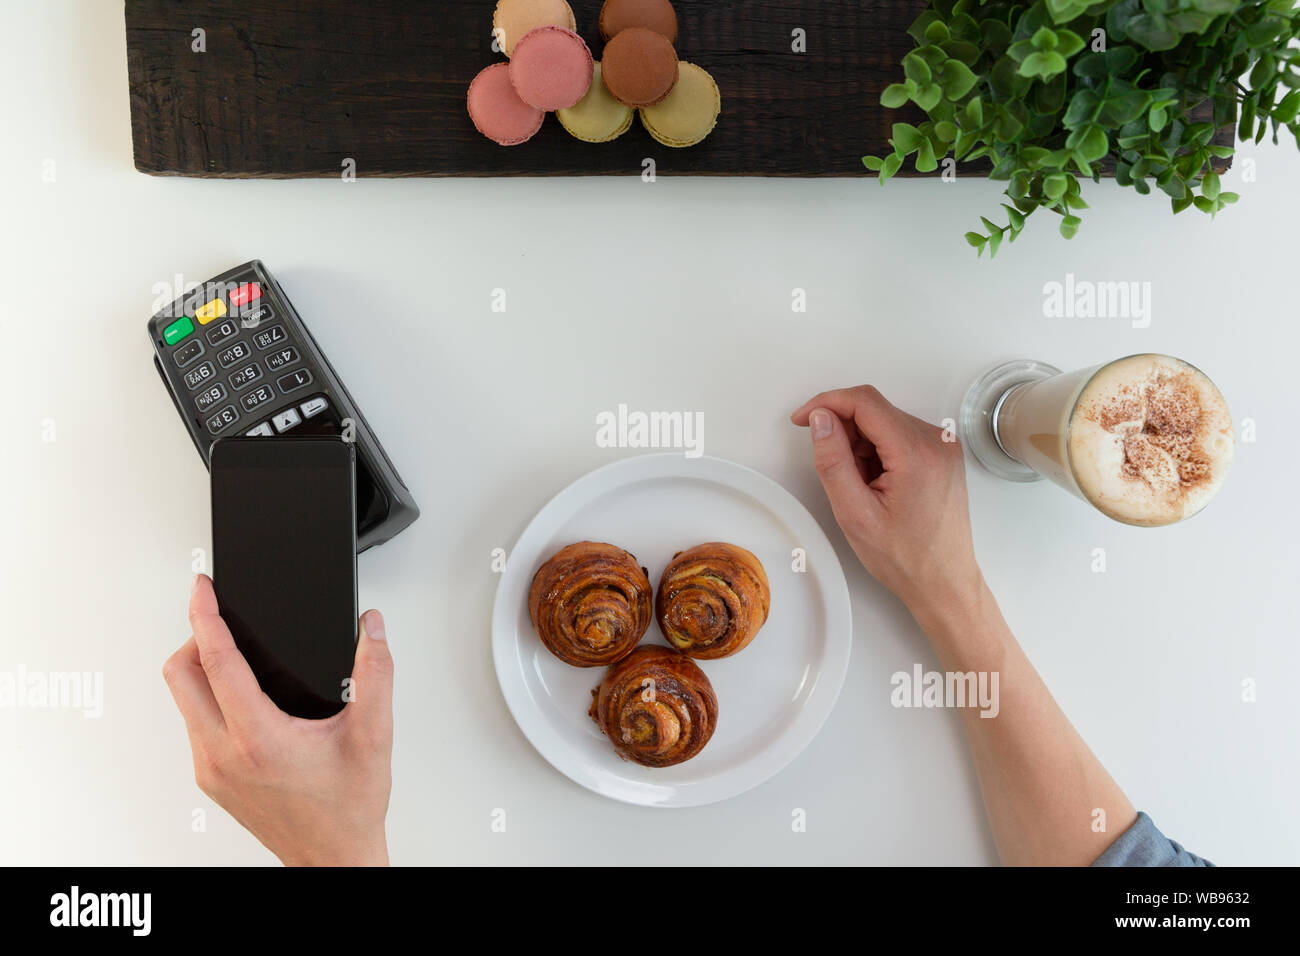 Customer making wireless or contactless payment using smartphone, nfc payment Stock Photo